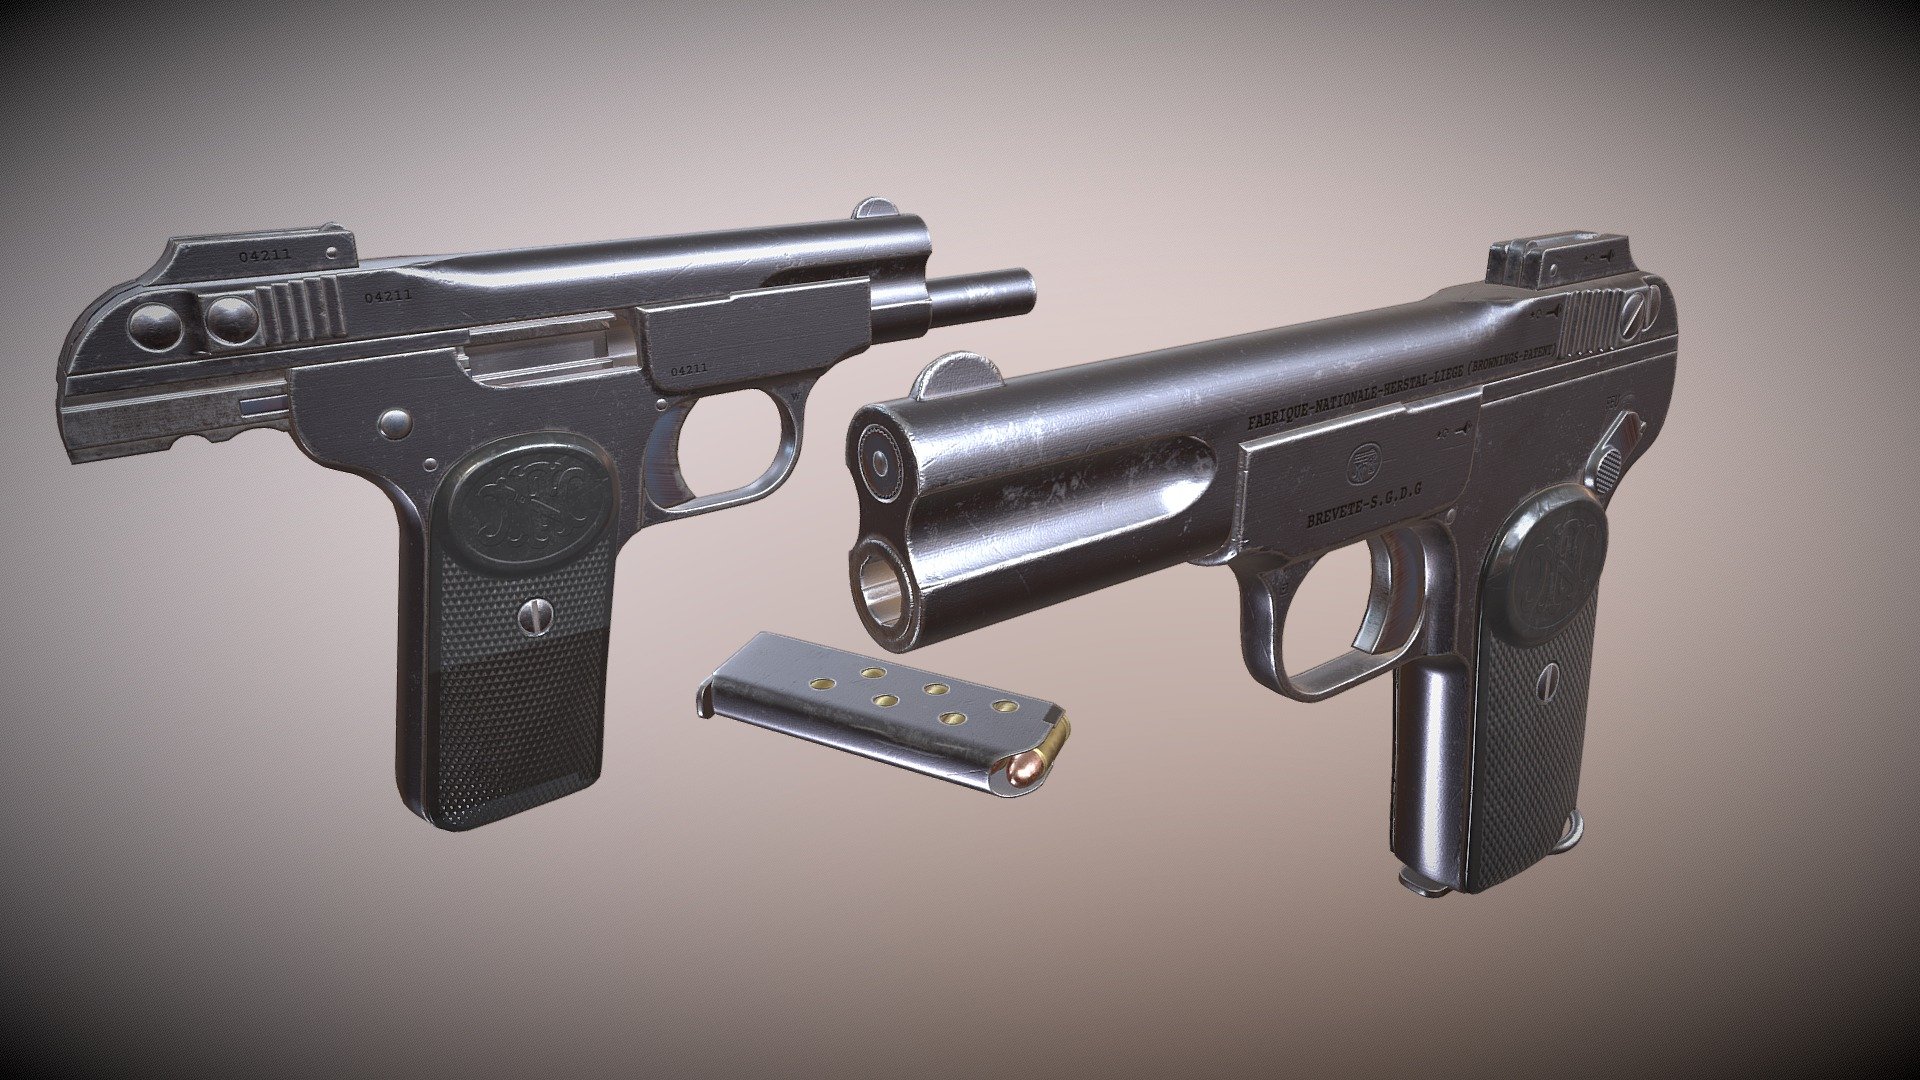 The FN Browning M1900 is a single action, semi-automatic pistol designed c. 1896 by John Browning for Fabrique Nationale de Herstal (FN) and produced in Belgium at the turn of the century. It was the first production handgun to use a slide.
Low-poly pbr-game-ready model

Textures 4k PBR Metallic Roughness

high poly modeling done in blender and ZBrush

Low poly done in blender

Textured in Substance painter, baked and rendered using Marmoset Toolbag 4 - M1900/Browning No.1 - Buy Royalty Free 3D model by Wallerion 3d model